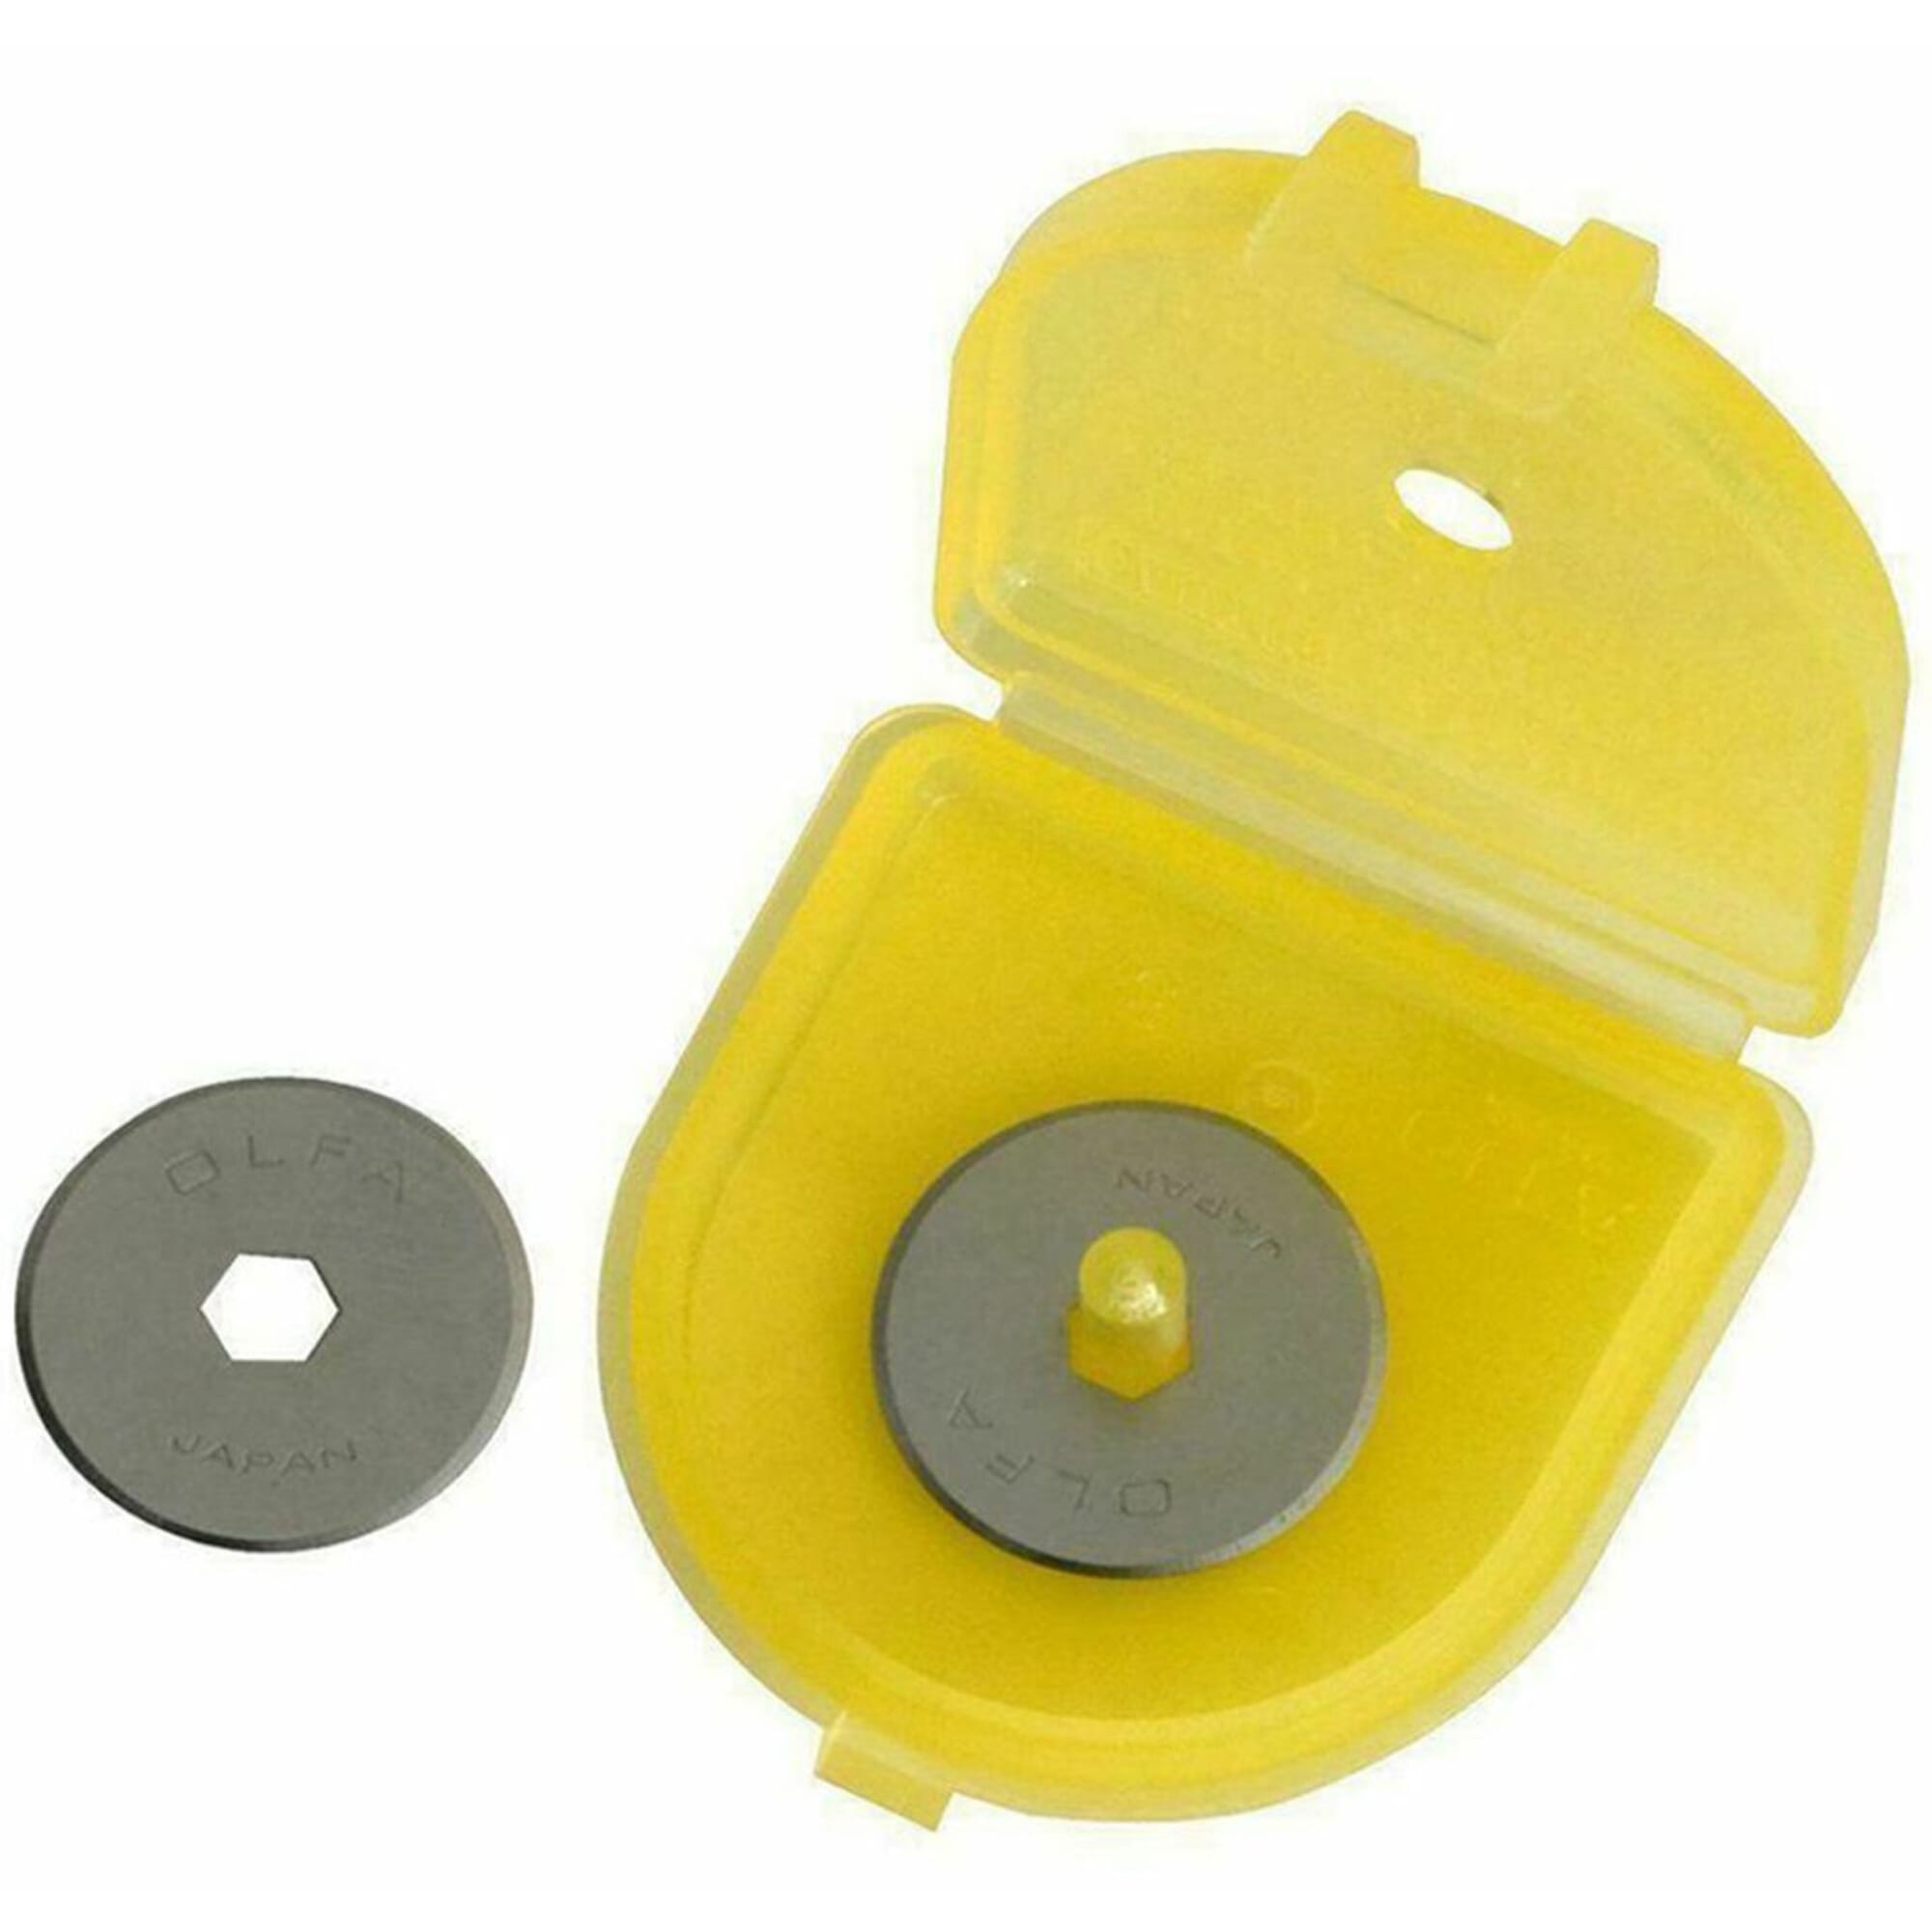 Spare Blades for Rotary Cutter (2pcs)